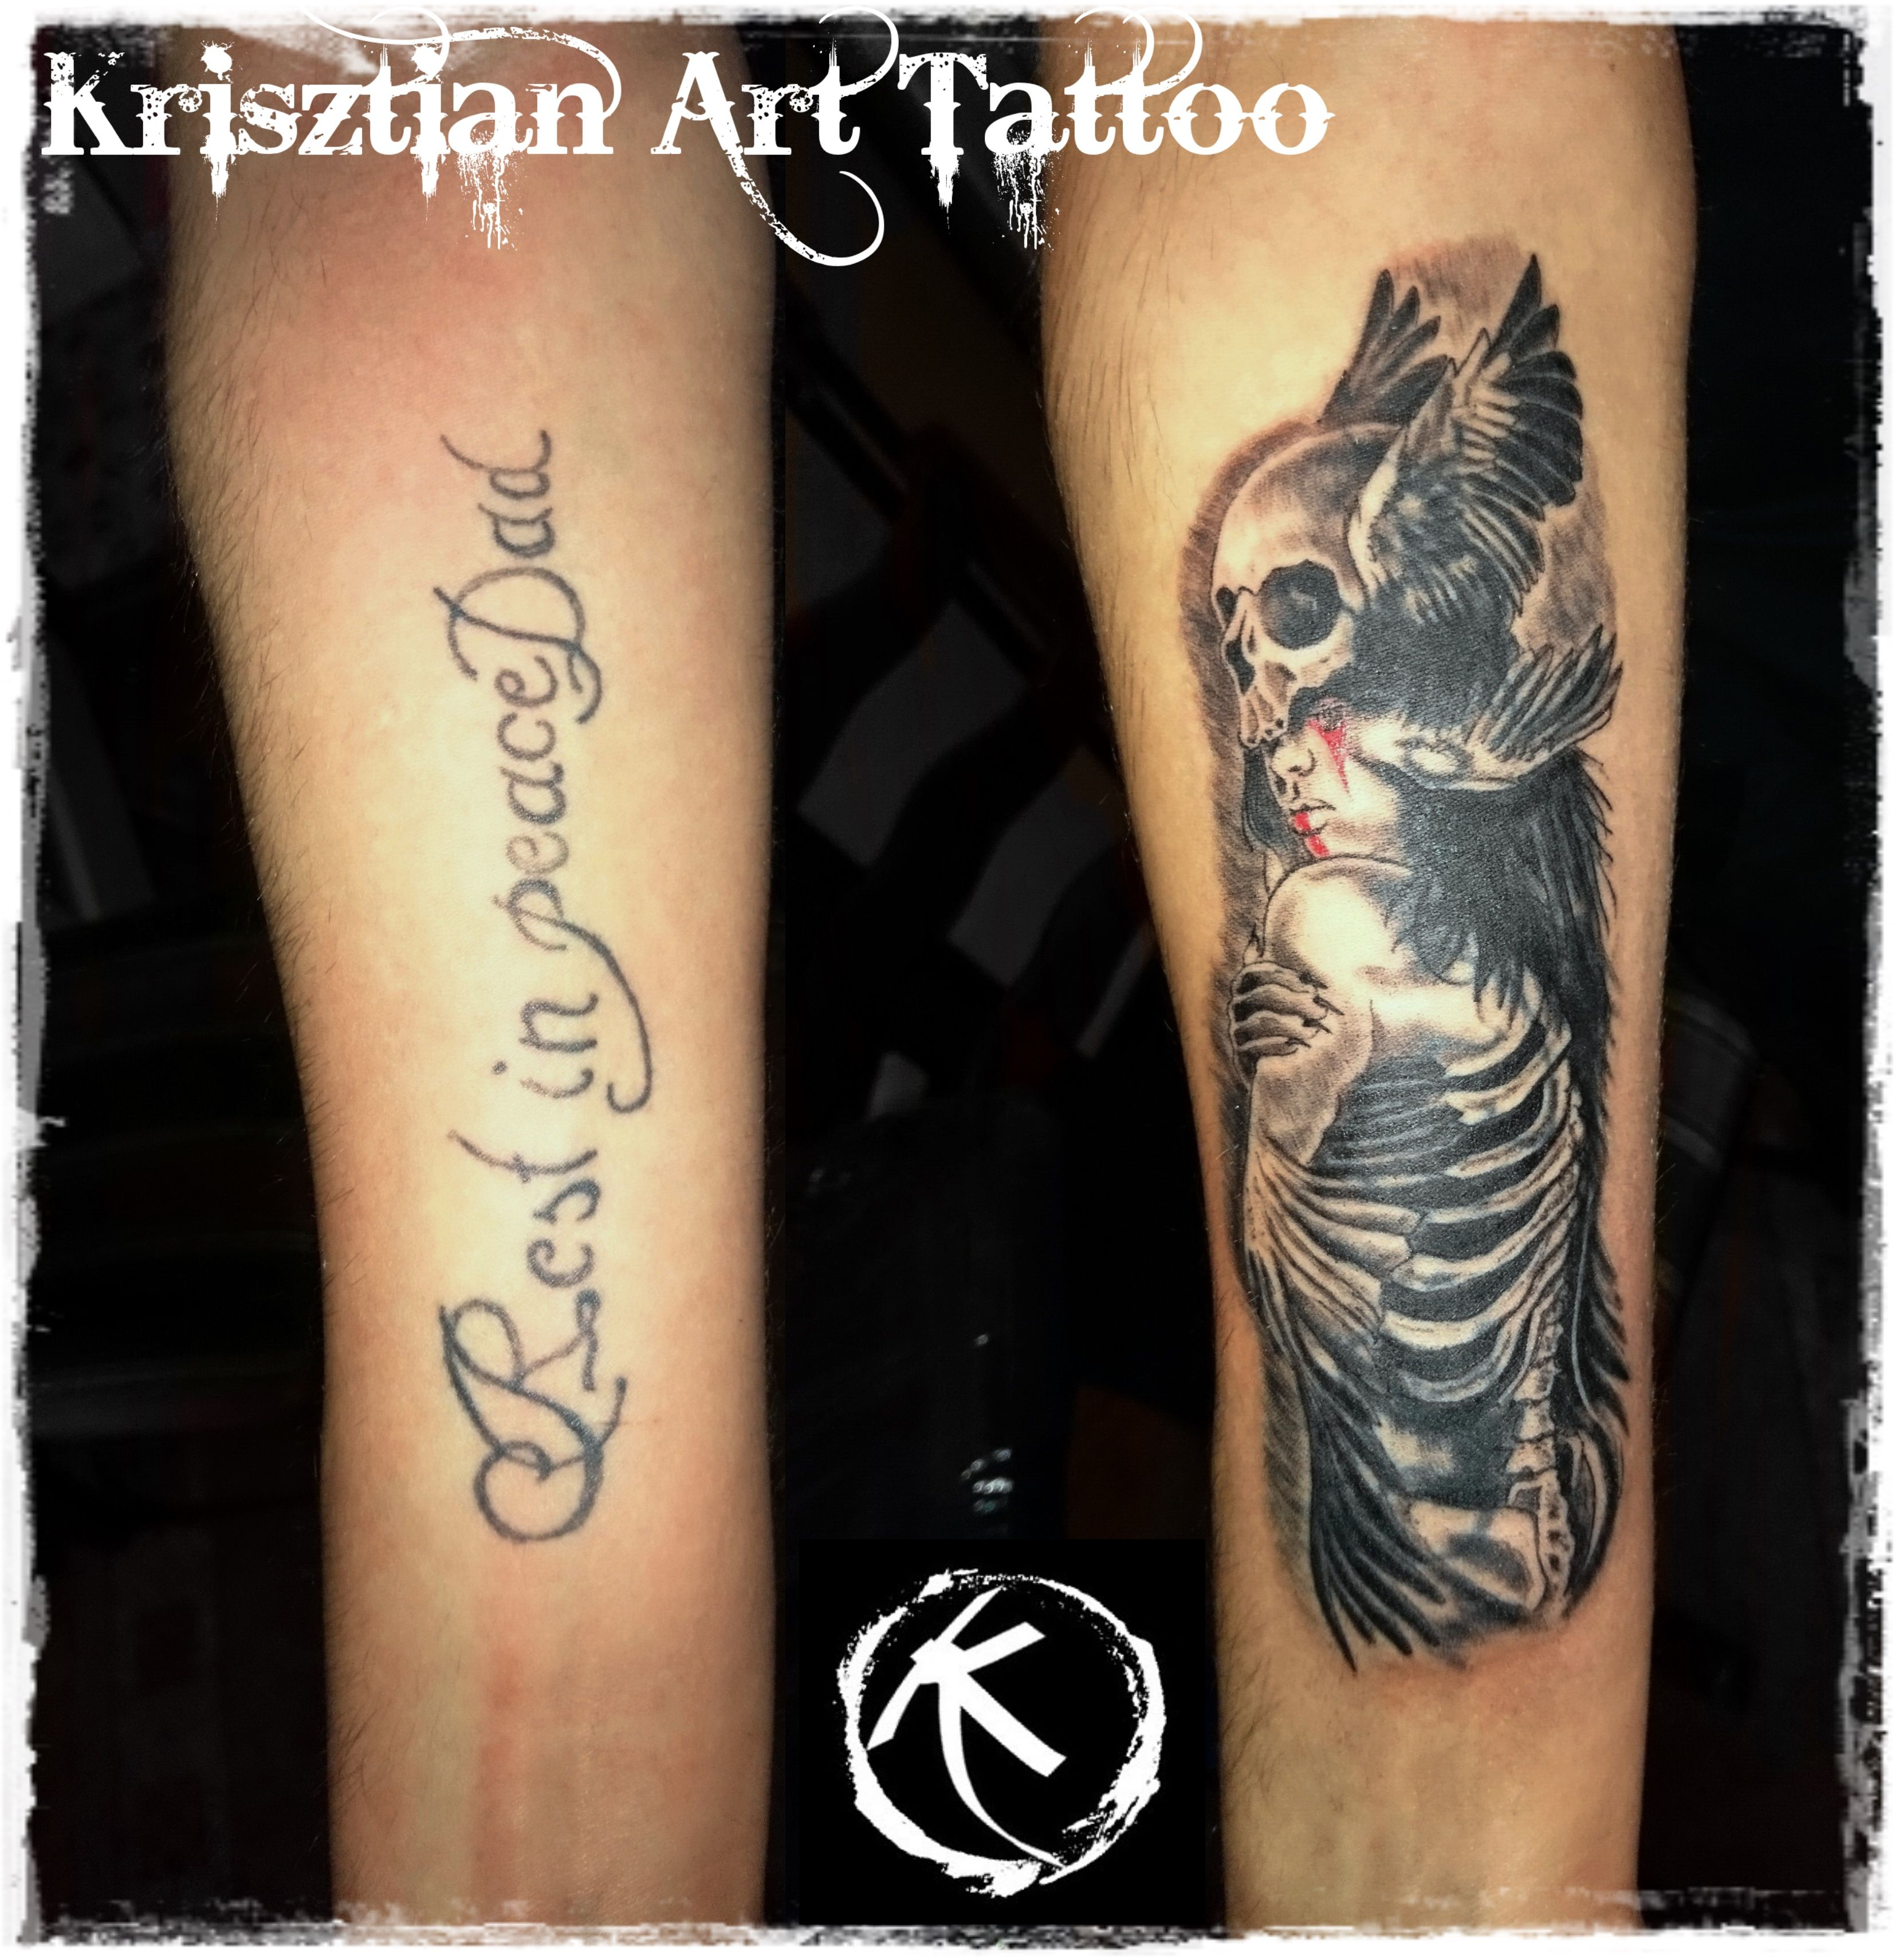 Krisztian Art Tattoo Cover Up Tattoo Forearm Skull And Girl in dimensions 3322 X 3422